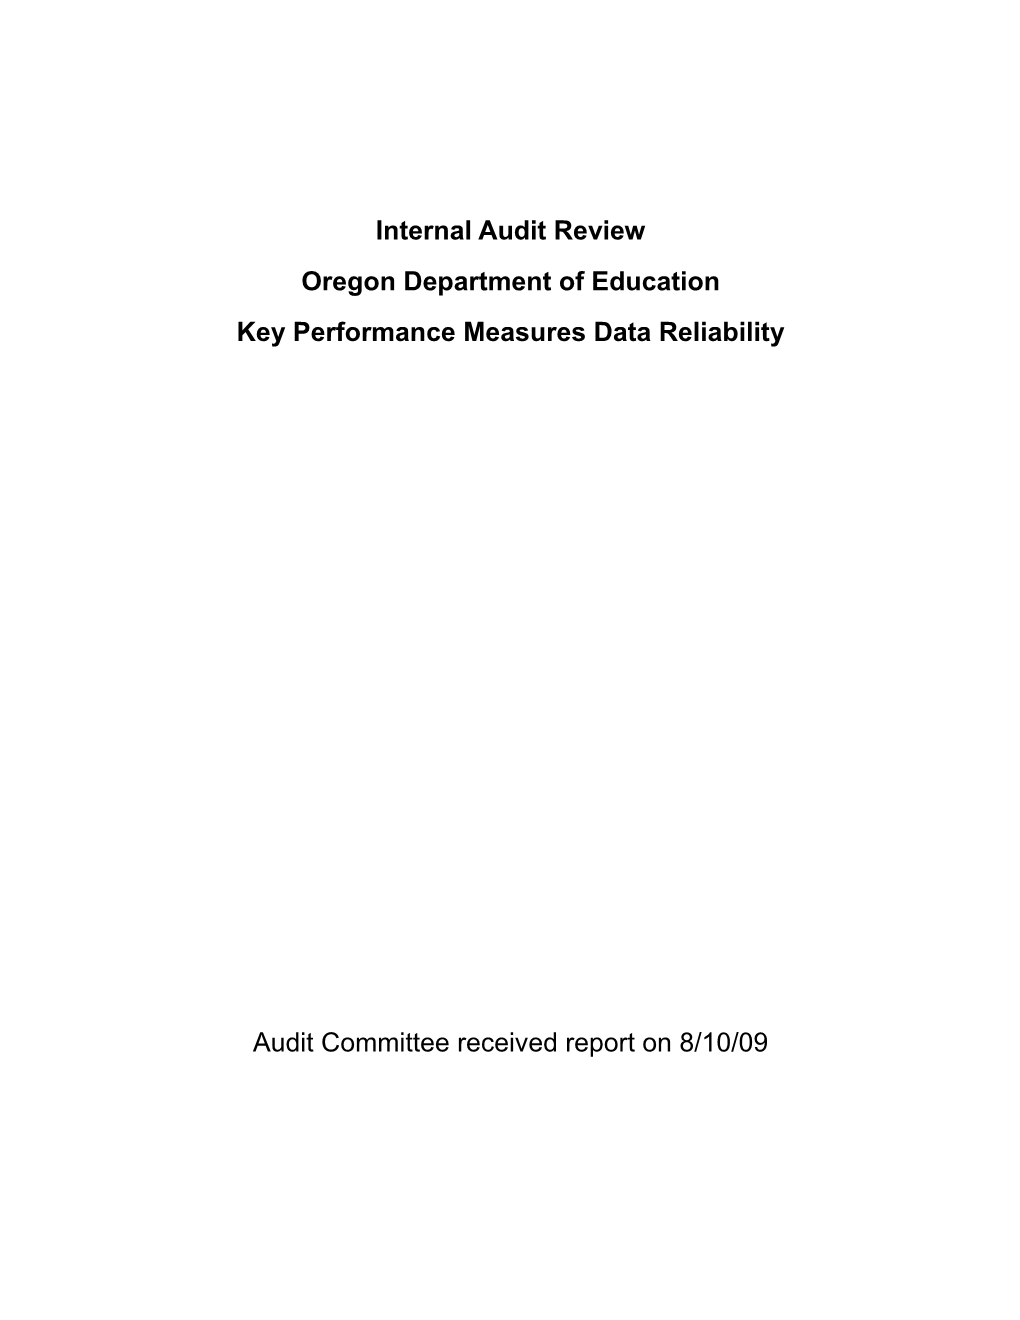 All State Agencies Are Required to Propose a Set of Key Performance Measures (KPM) During